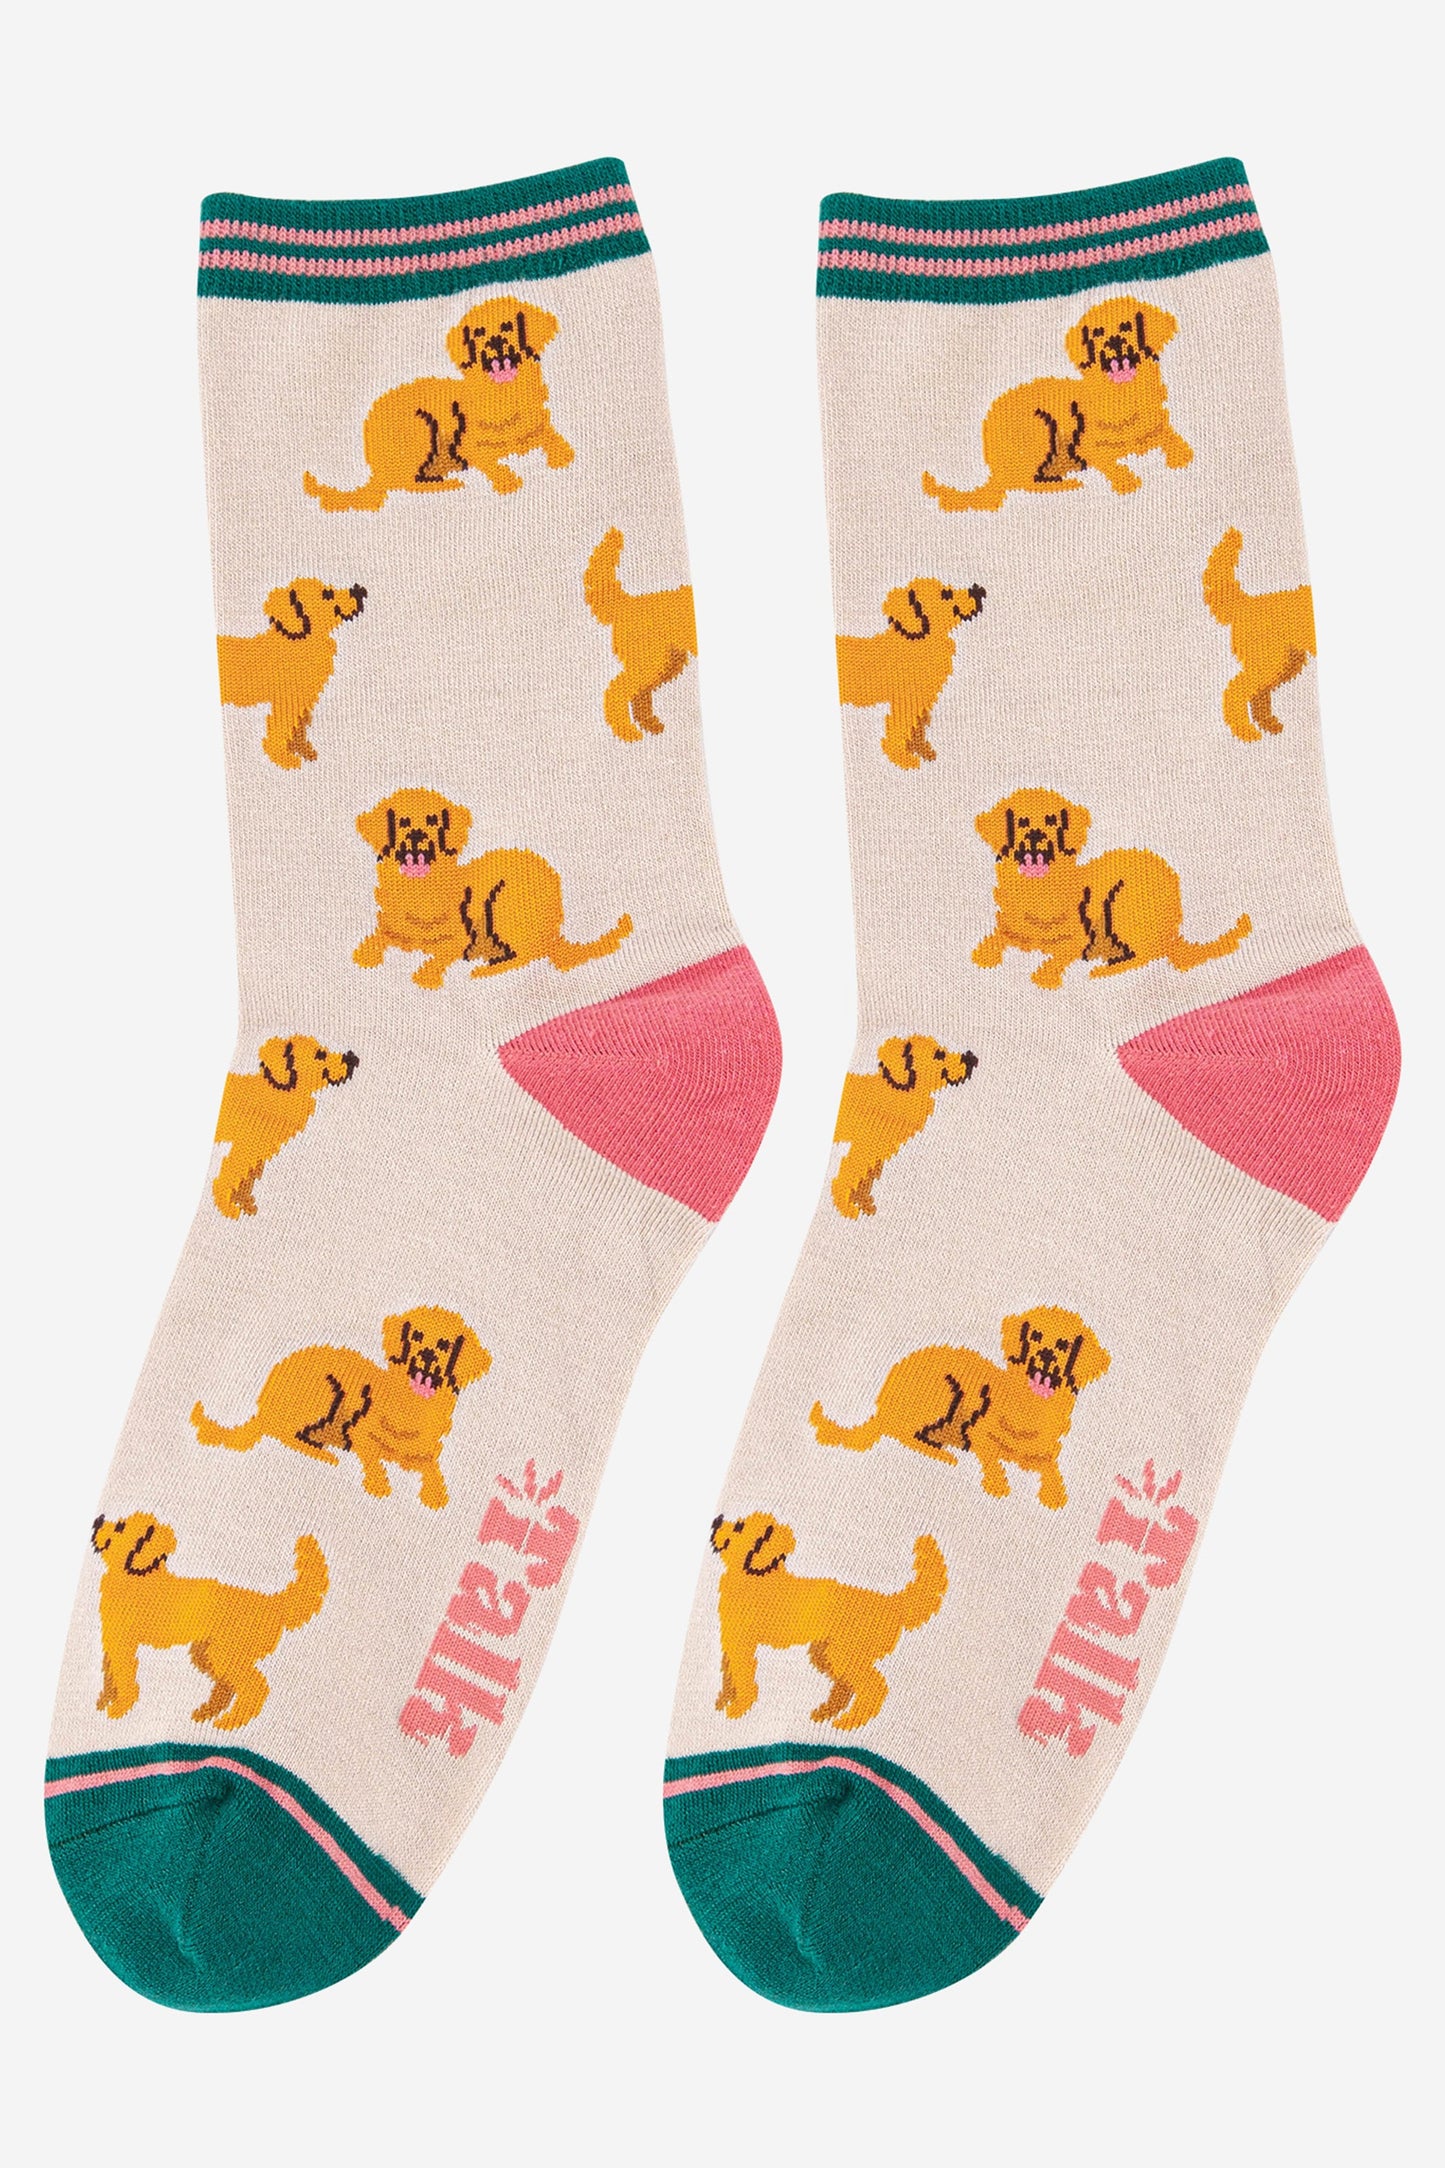 golden retriever pattern ankle socks with a green and pink striped cuff